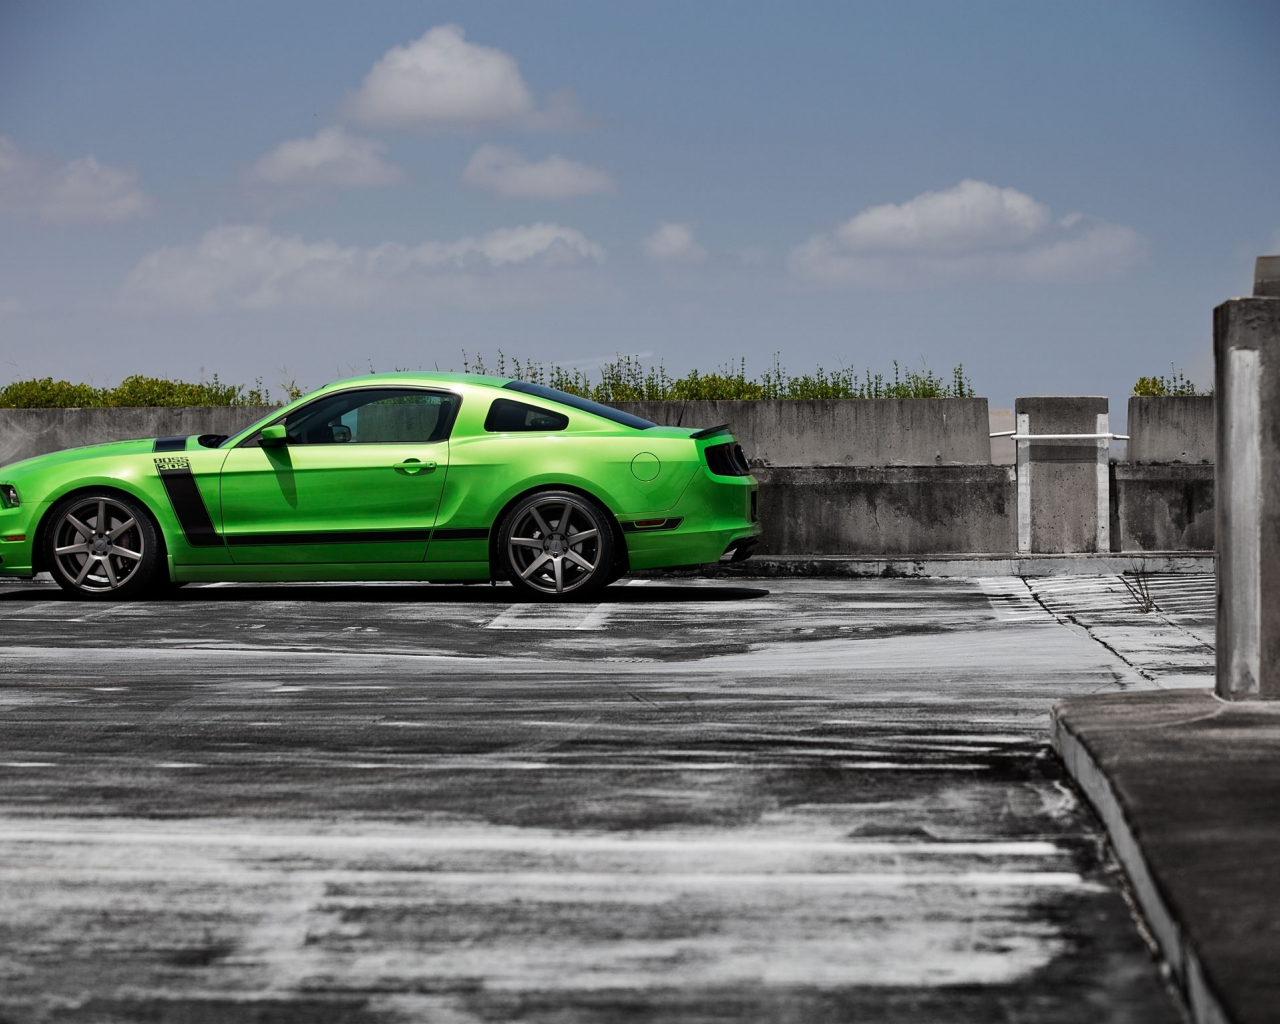 green, ford, форд, мустанг босс 302, mustang boss 302, салатовый